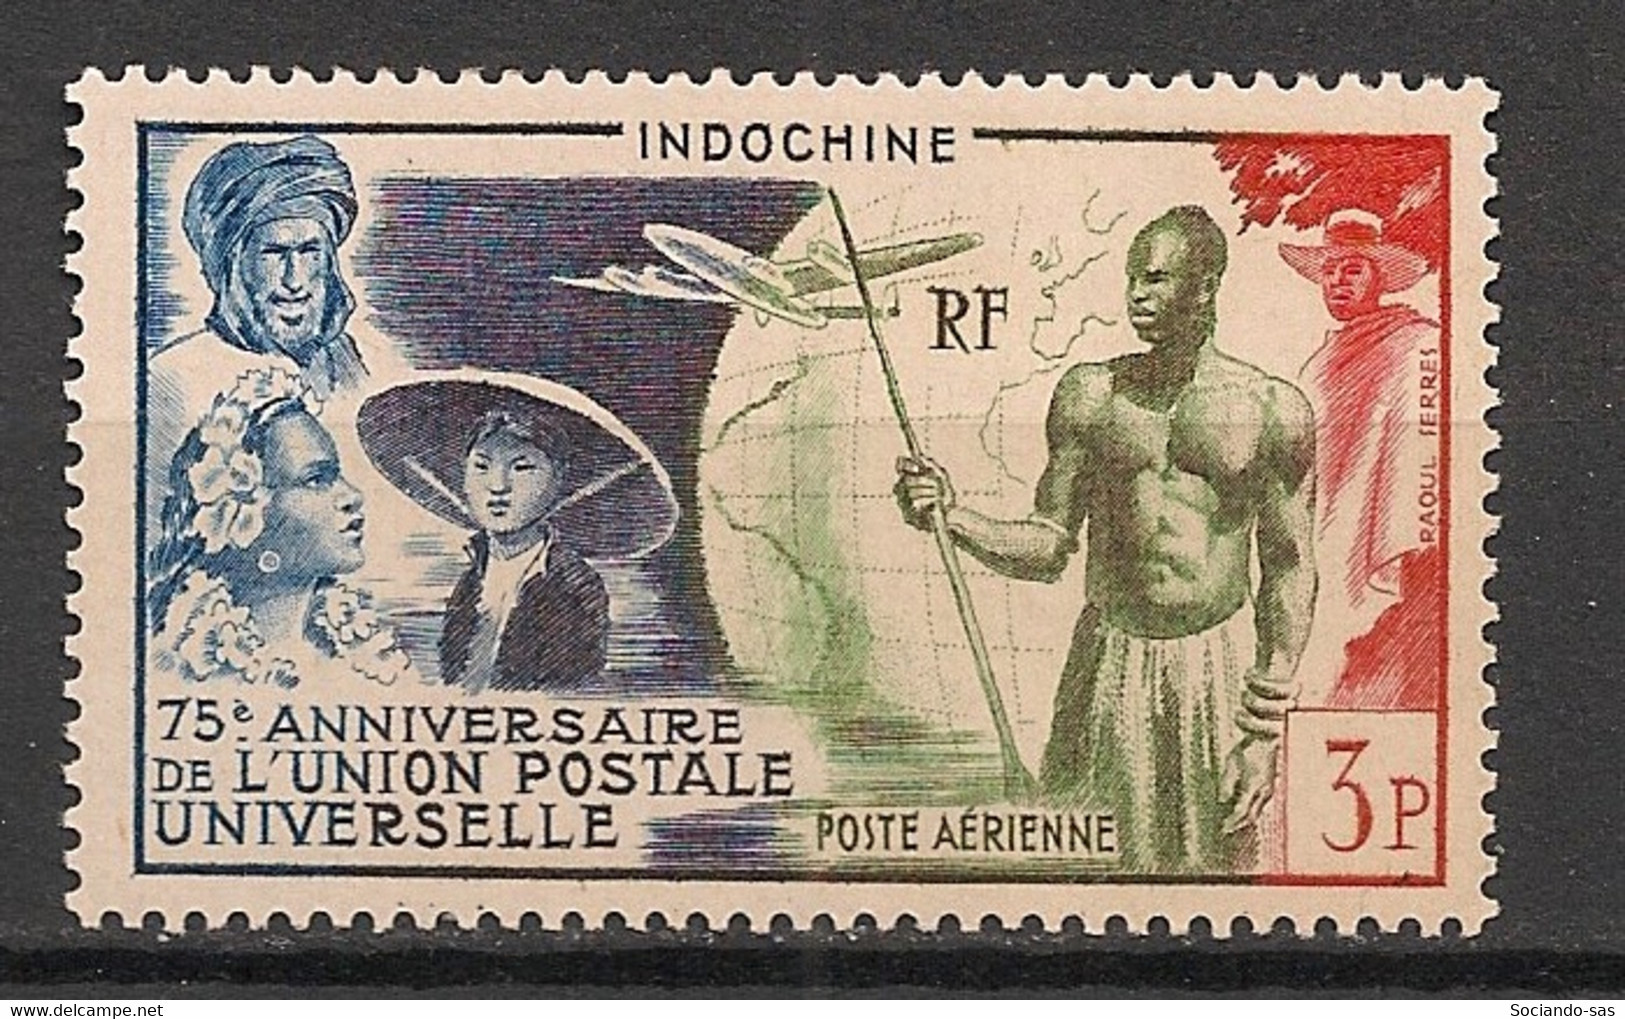 INDOCHINE - 1949 - Poste Aérienne PA N°YT. 48 - UPU / Union Postale Universelle - Neuf * / MH VF - Luftpost